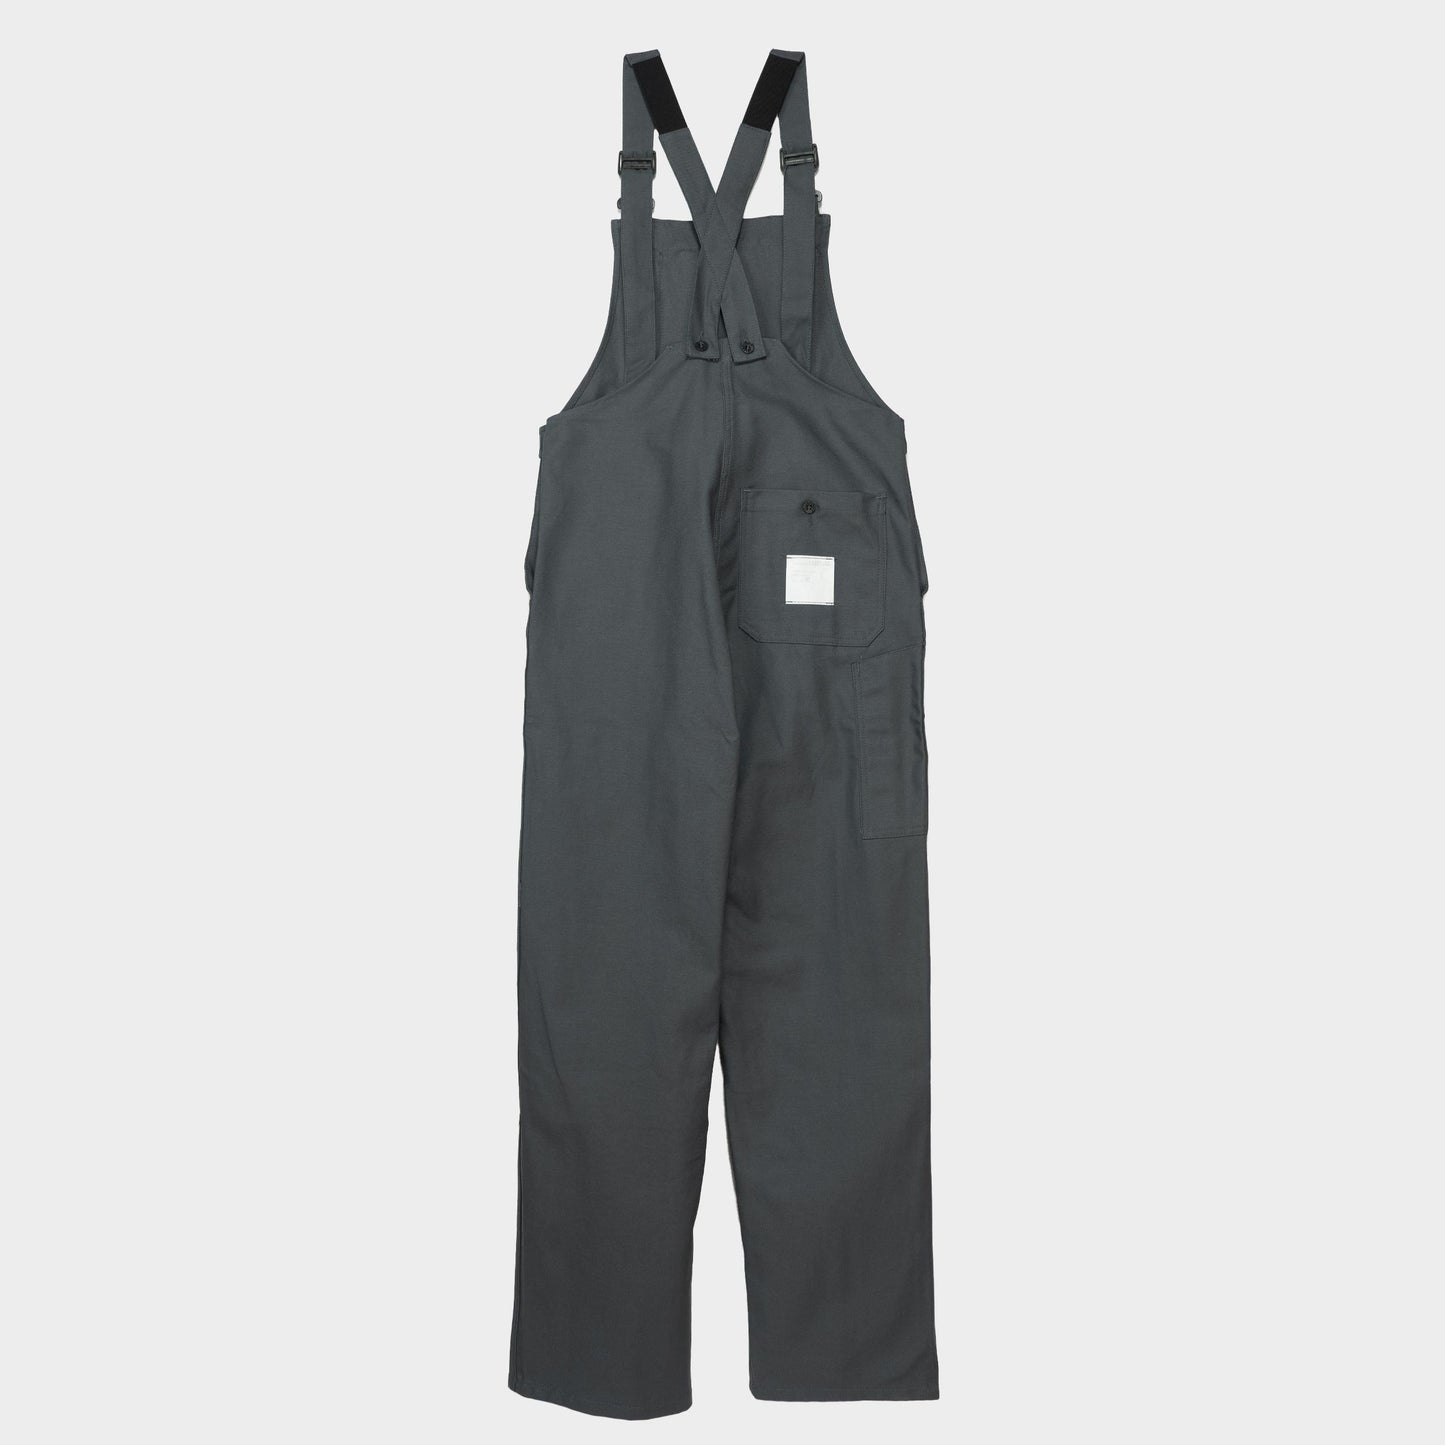 Le Laboureur for Gardenheir French Cotton Overalls in Grey